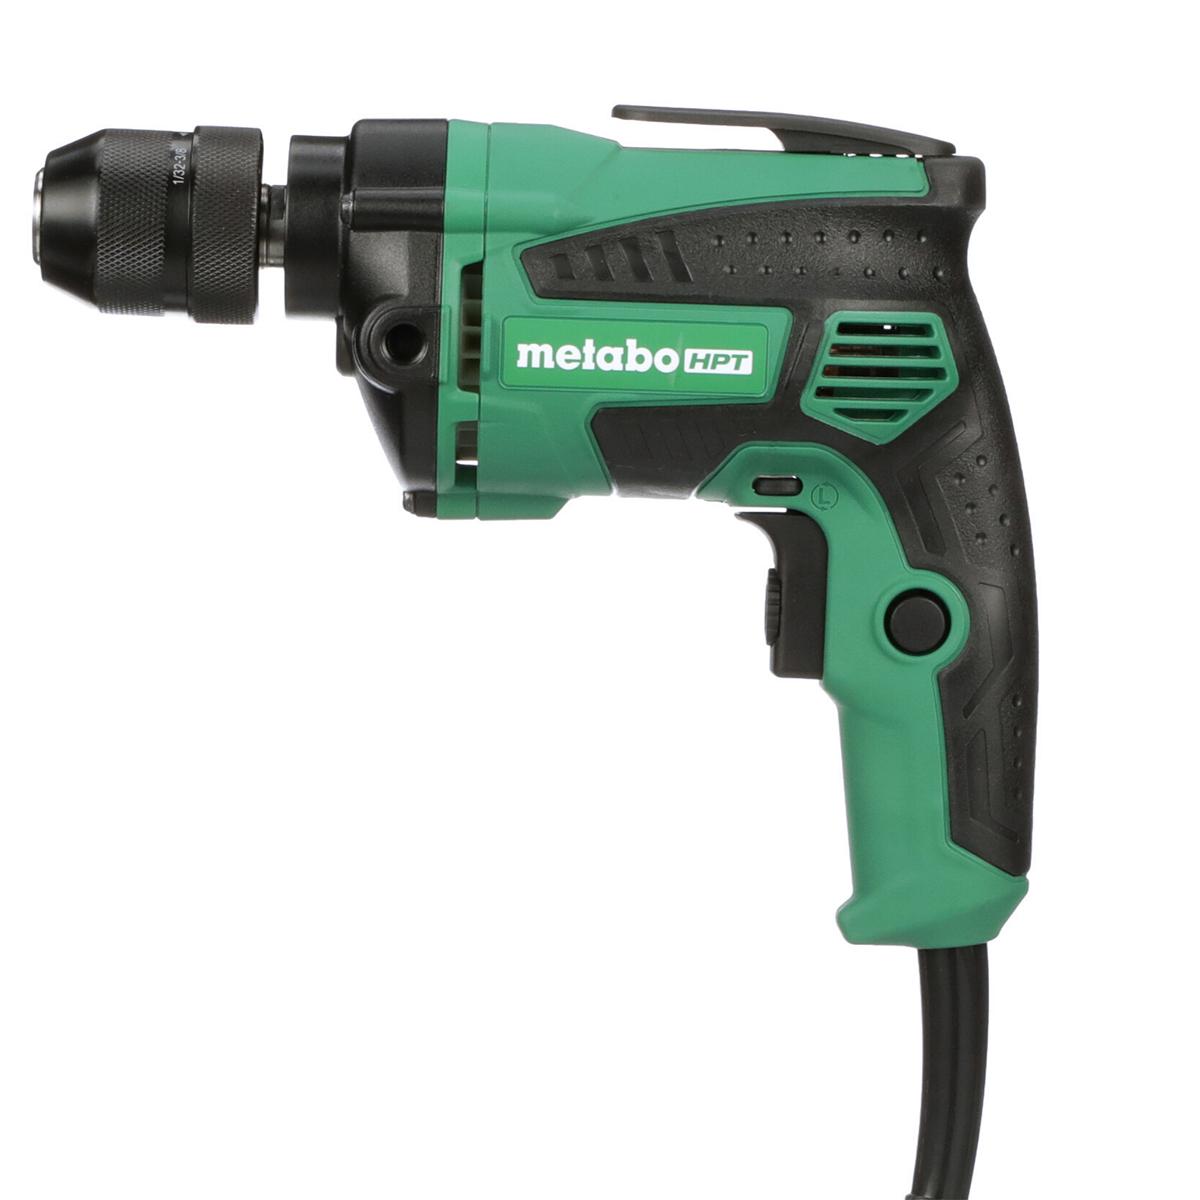 Metabo HPT Keyless Corded Drill for $19.98